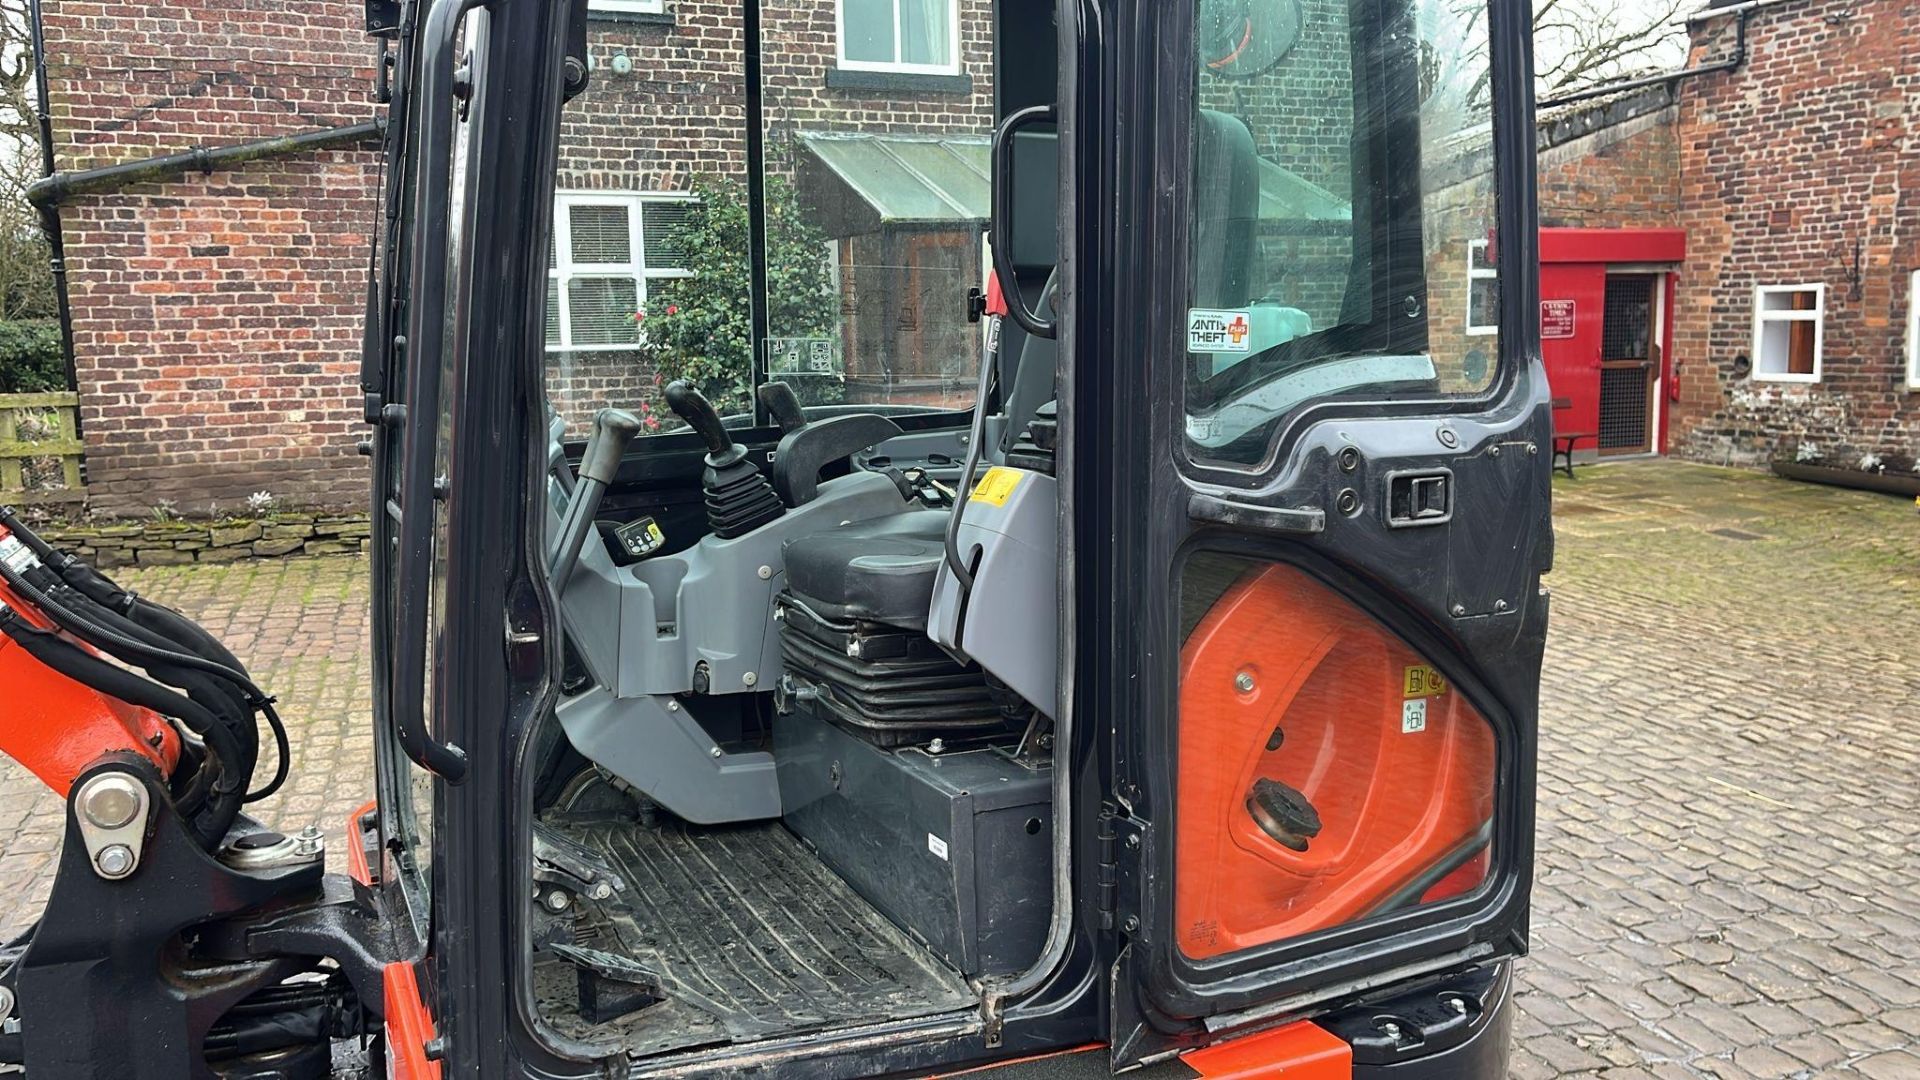 2019 KUBOTA U48-4 COMPACT EXCAVATOR 552 HOURS WITH HYDRAULIC QUICK HITCH TO BE SOLD WITH 4 BUCKETS - Bild 14 aus 24